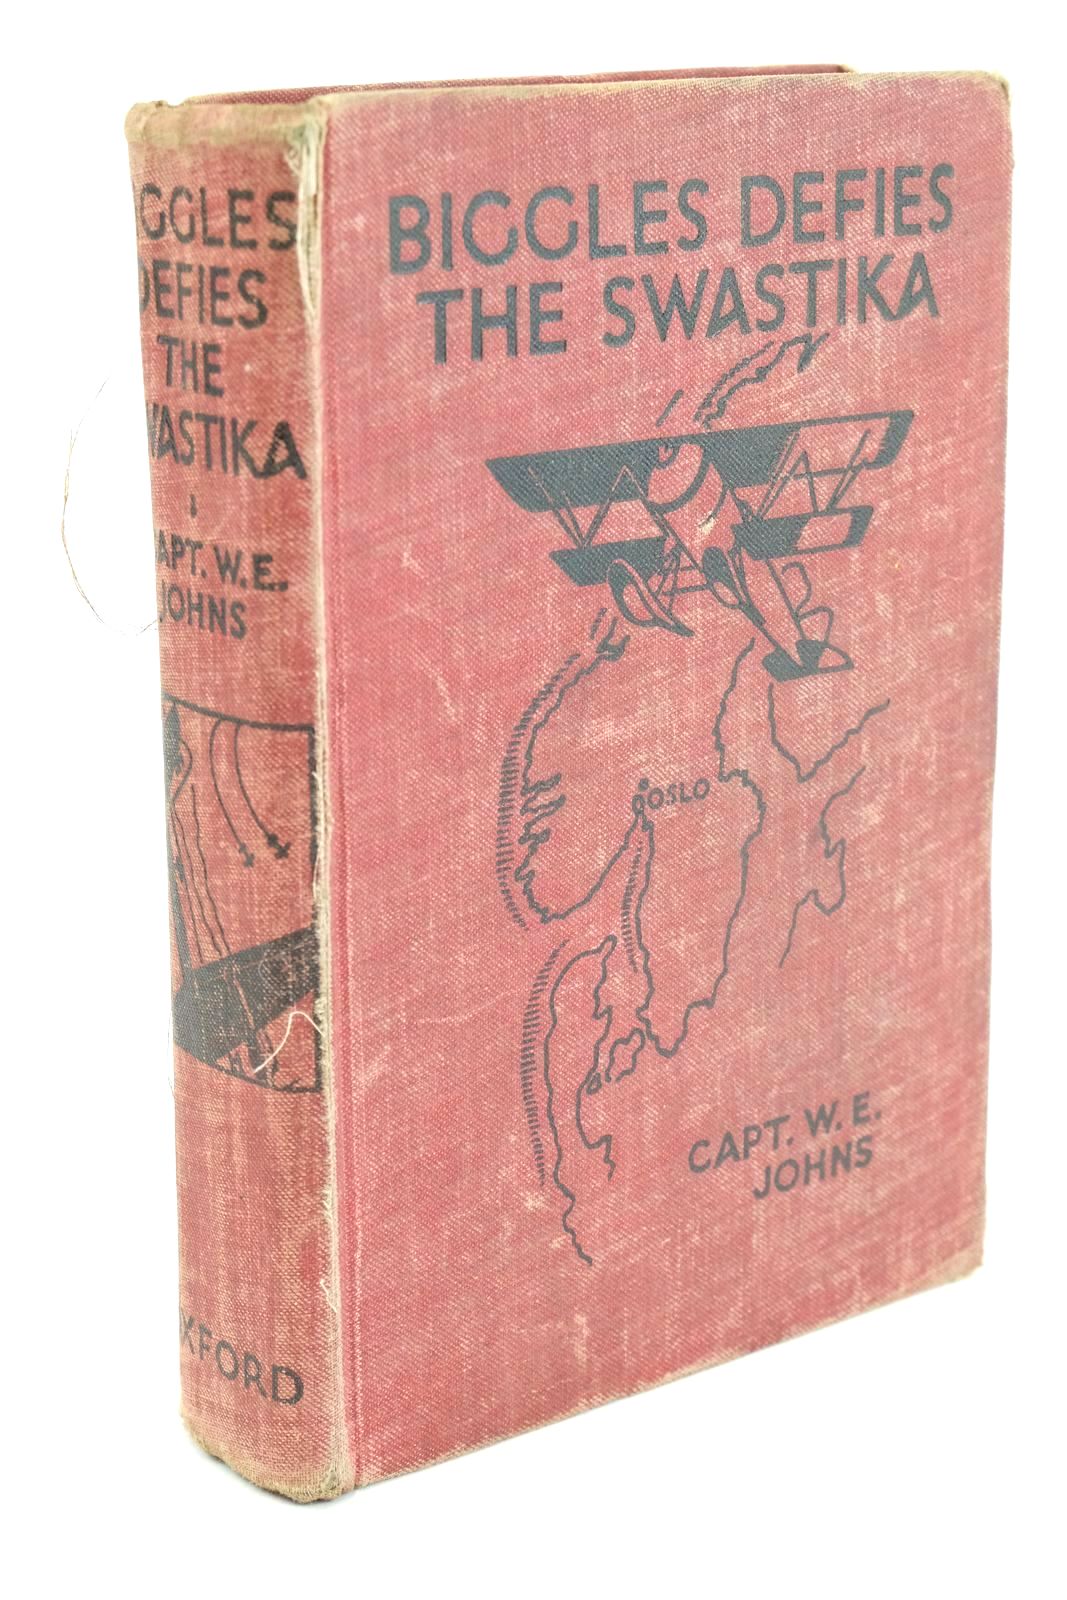 Photo of BIGGLES DEFIES THE SWASTIKA written by Johns, W.E. illustrated by Leigh, Howard
Sindall, Alfred published by Oxford University Press (STOCK CODE: 1324864)  for sale by Stella & Rose's Books